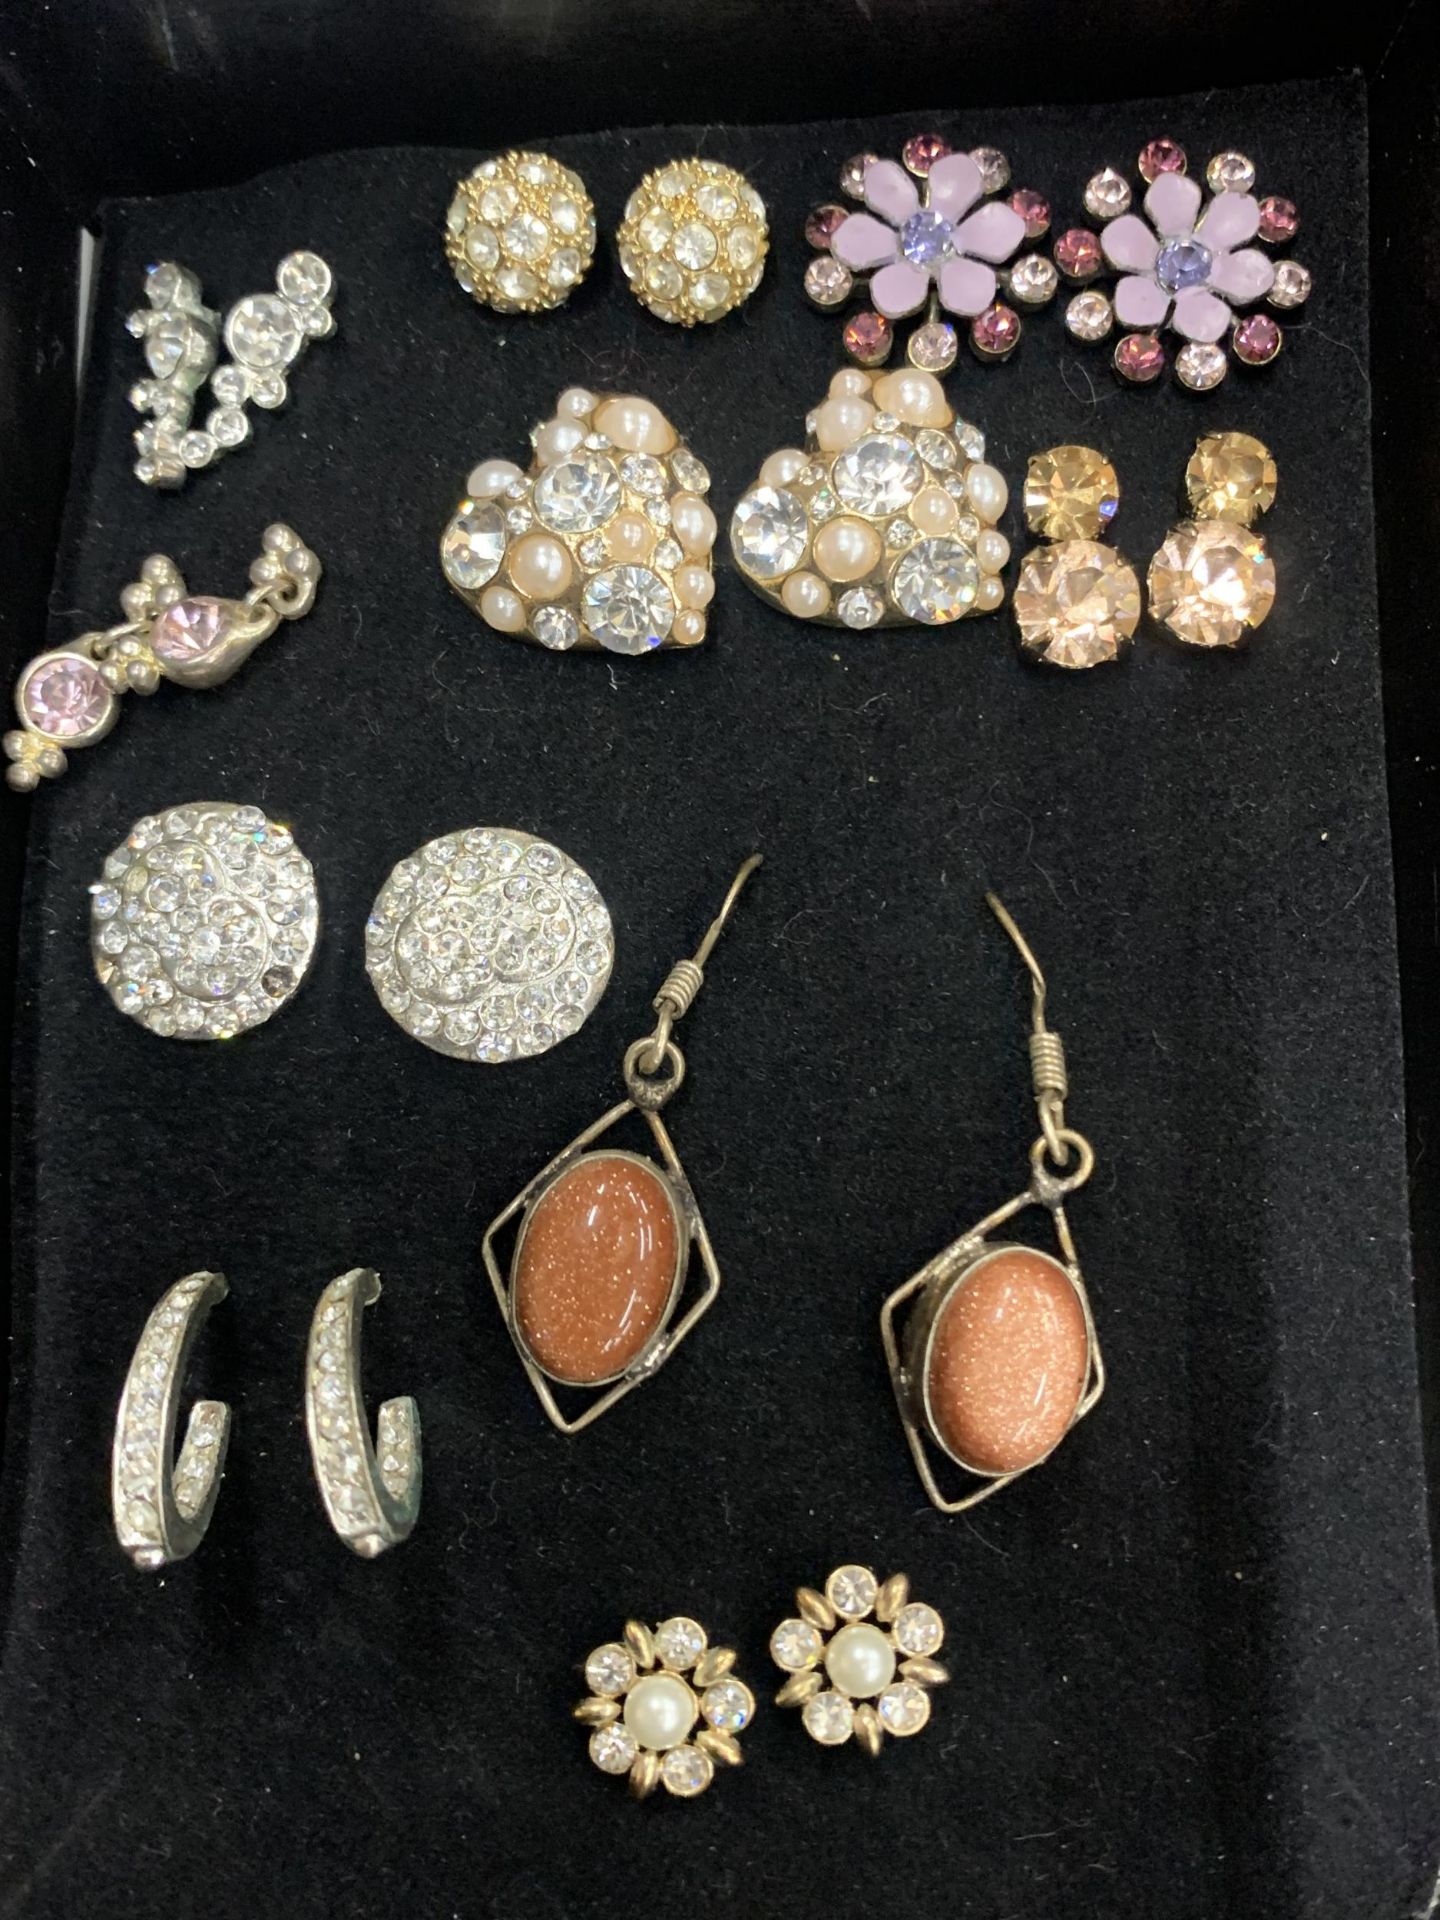 A VERY LARGE QUANTITY OF COSTUME JEWELLERY MANY BOXED TO INCLUDE EARRINGS, BROOCHES, PENDANTS, - Image 6 of 6